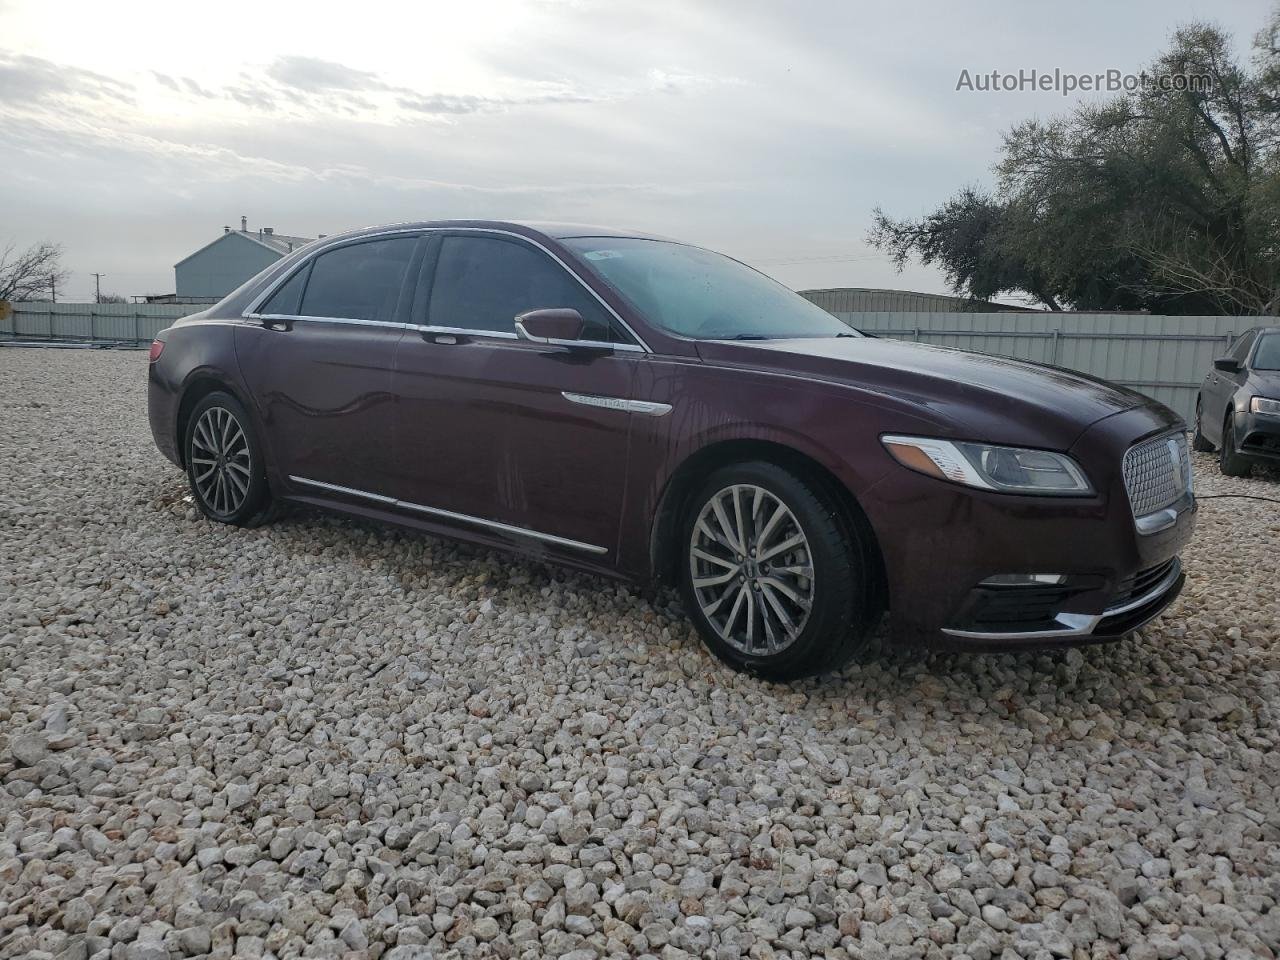 2017 Lincoln Continental Select Темно-бордовый vin: 1LN6L9SK9H5624040